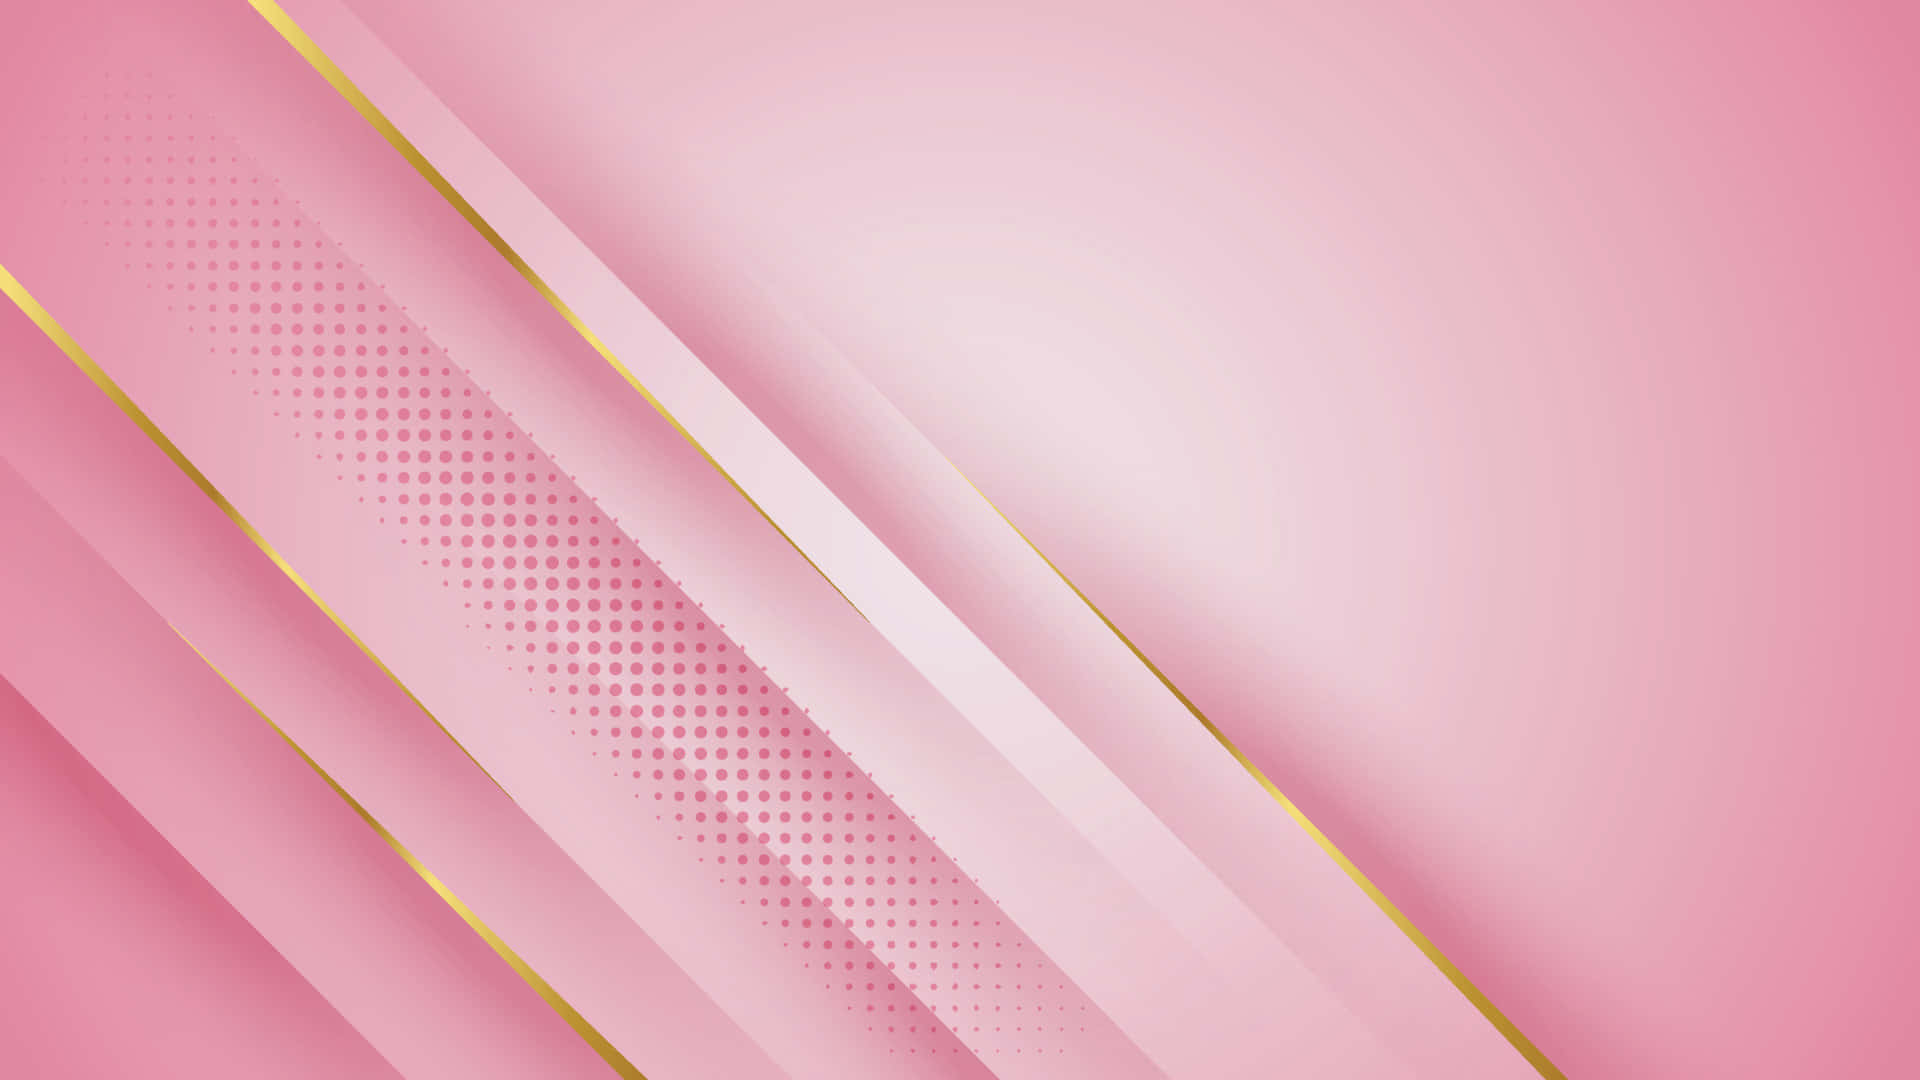 "Dream in Color with Solid Pink" Wallpaper